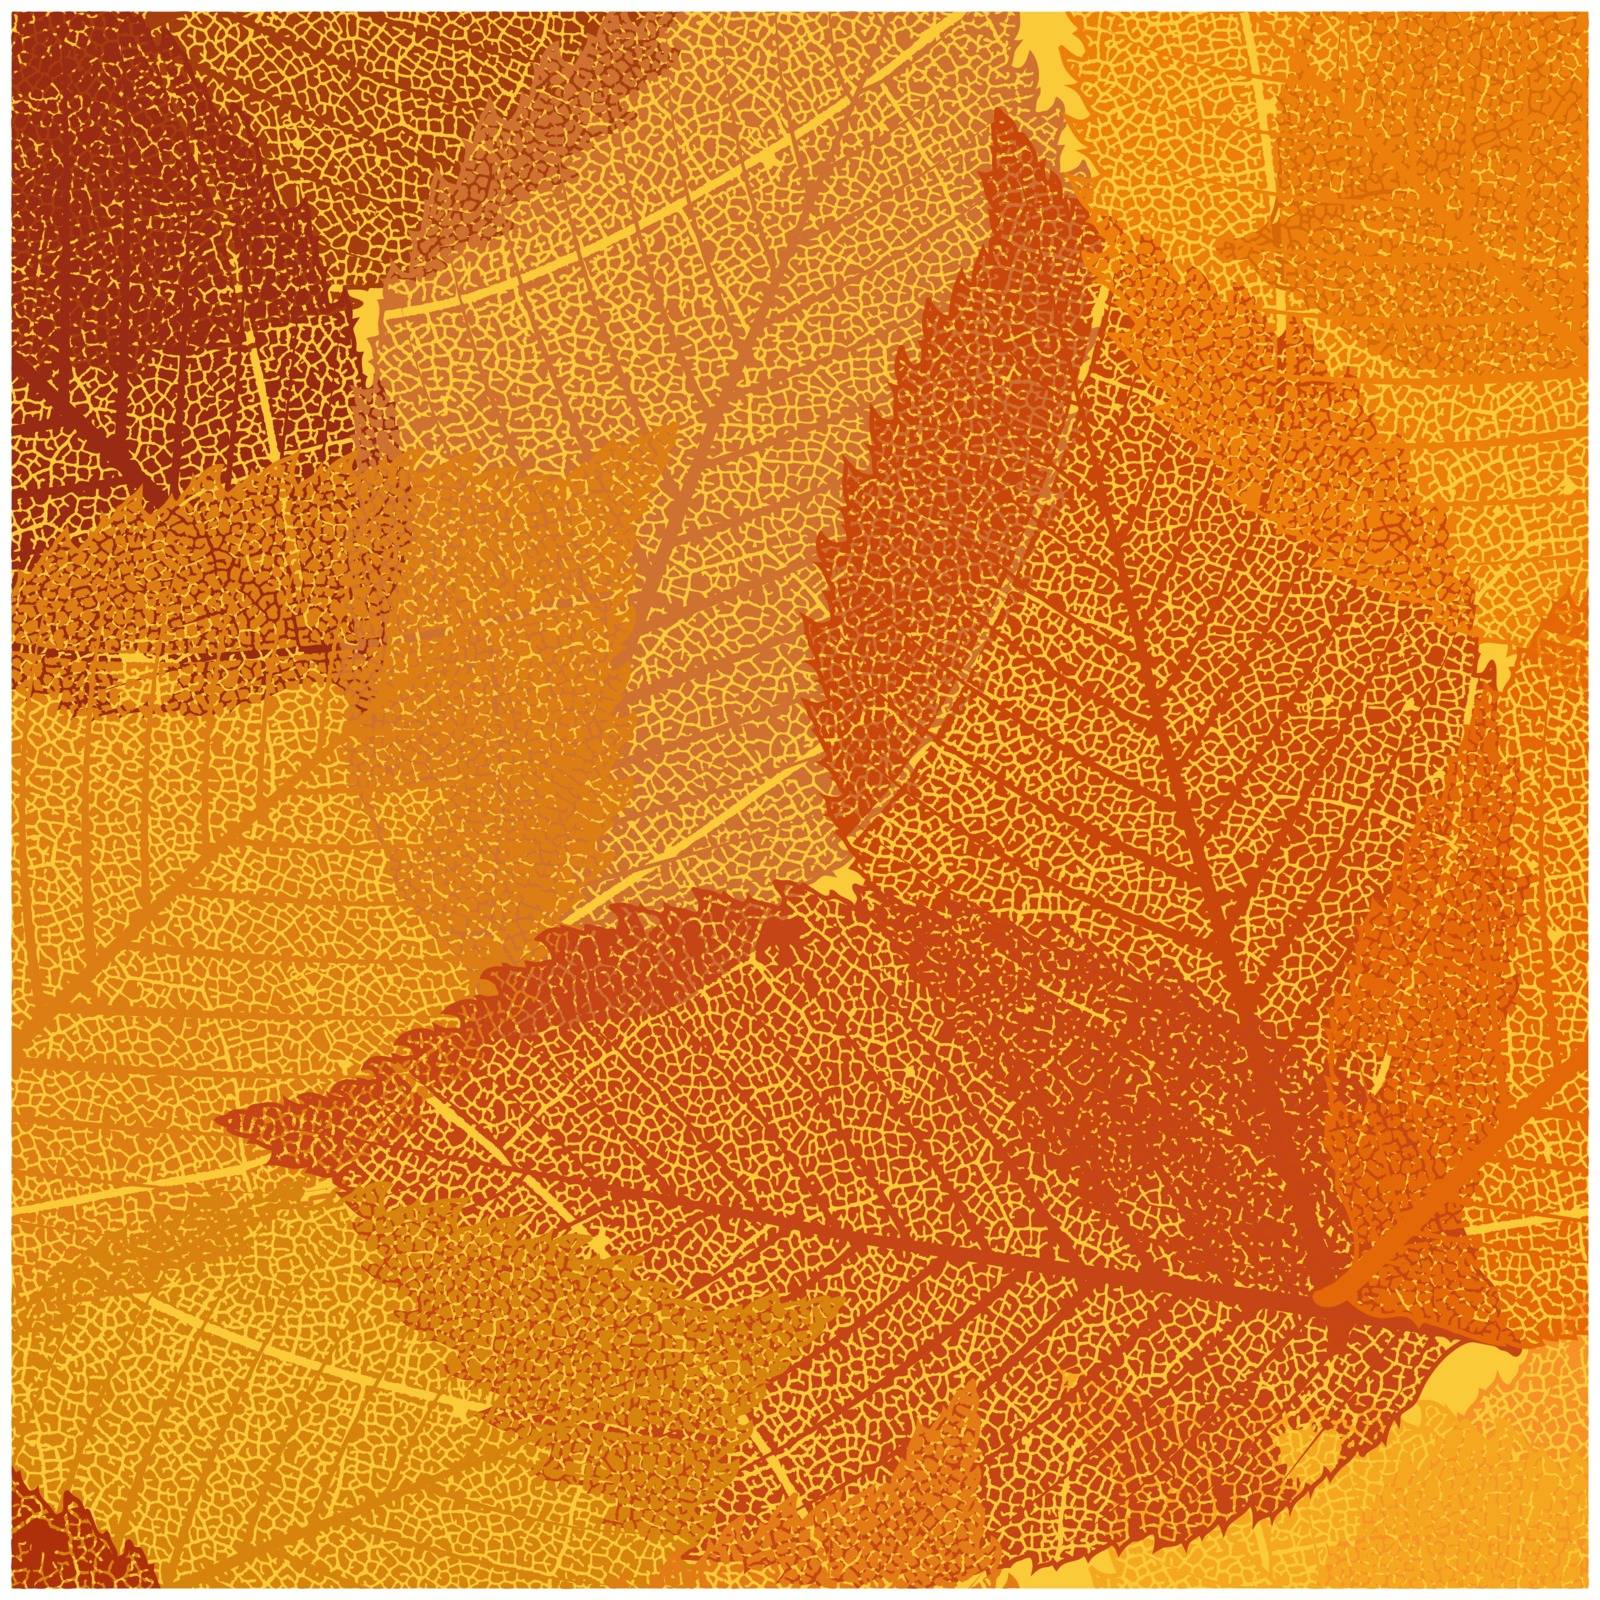 Dry autumn leaves template. EPS 8 by Petrov_Vladimir